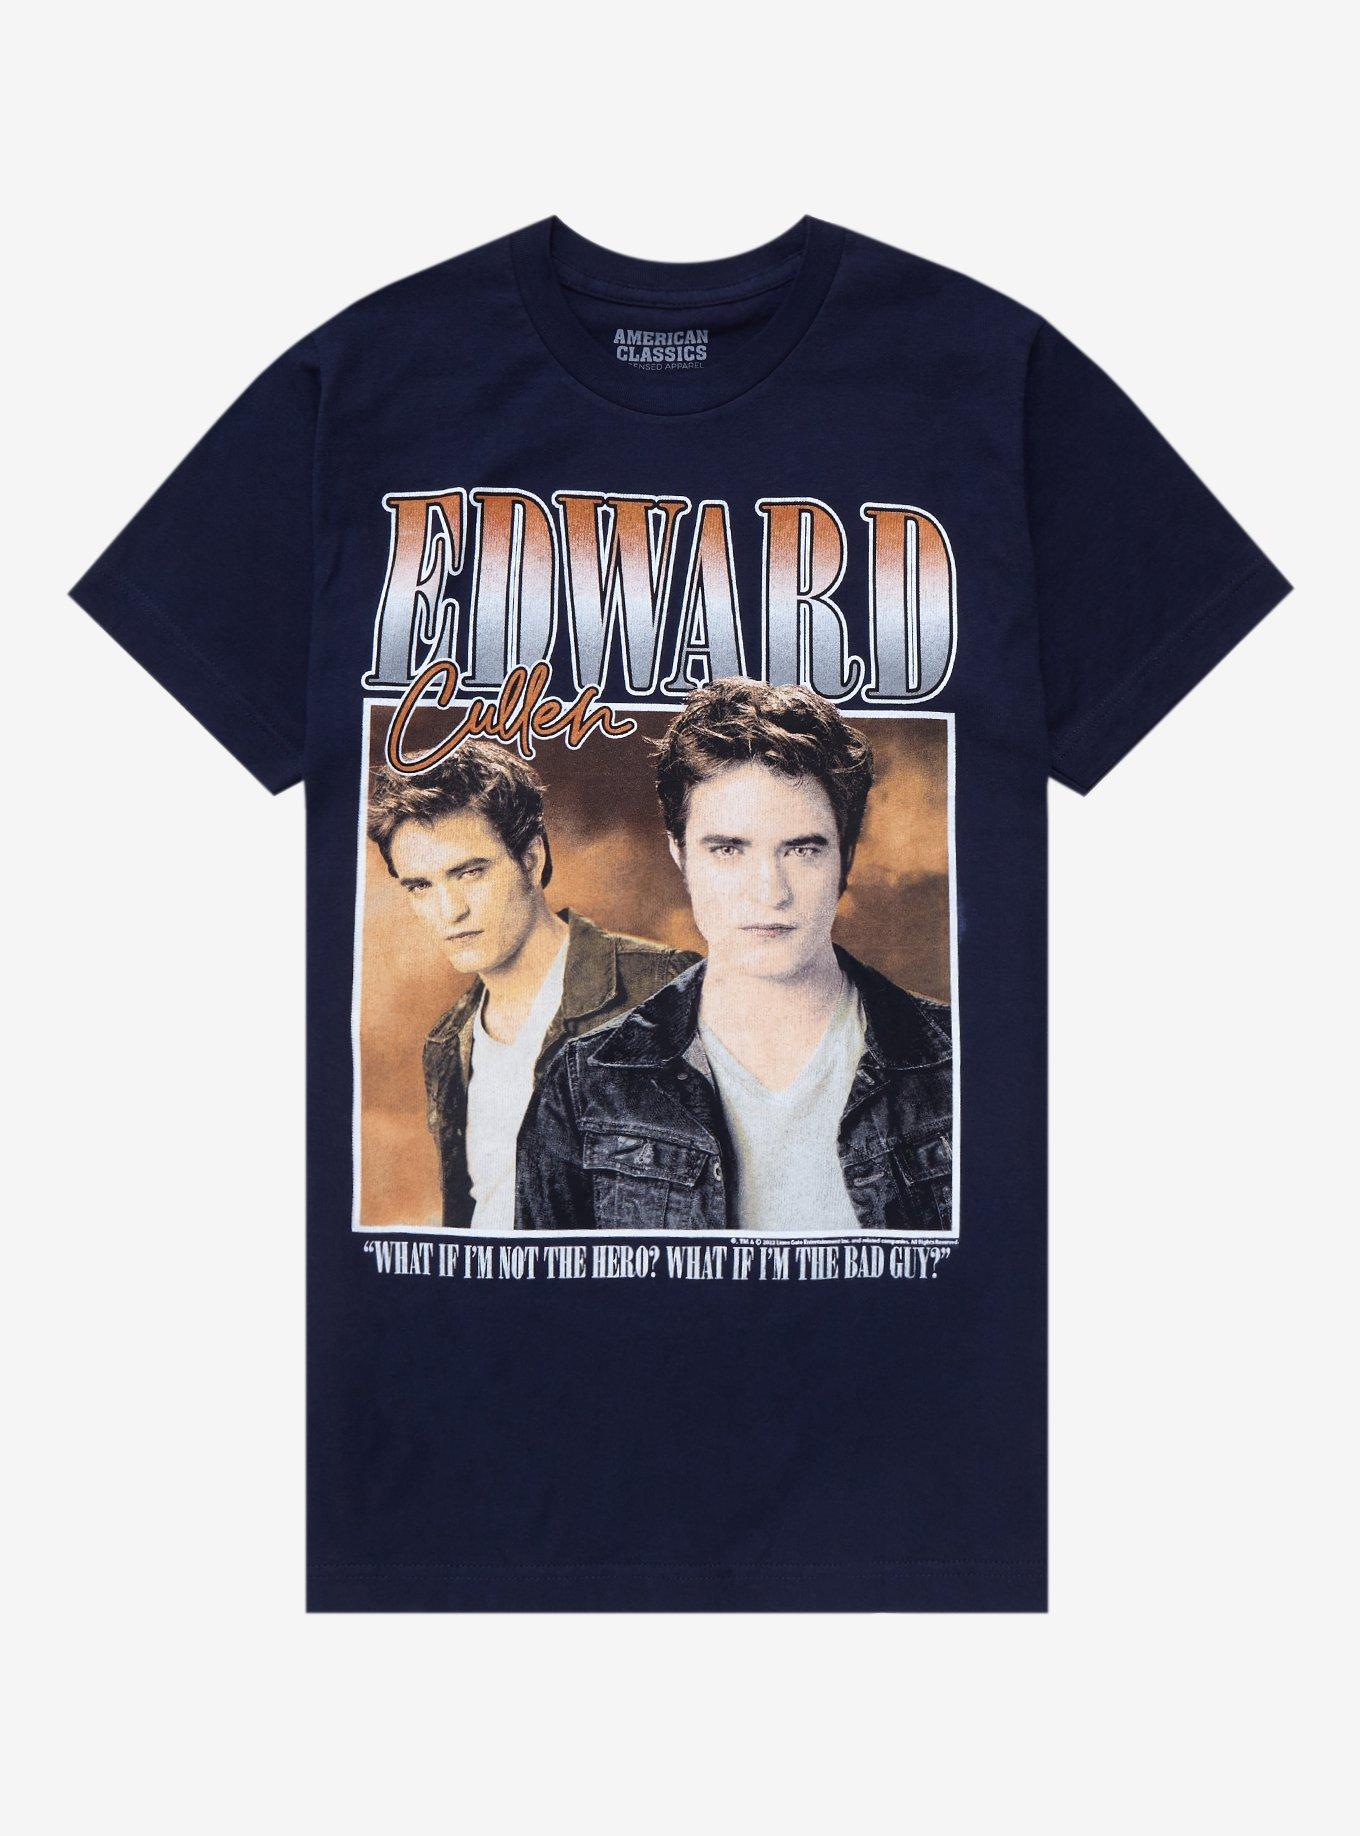 I think the twilight movies are awesome Edward Cullen t- shirt